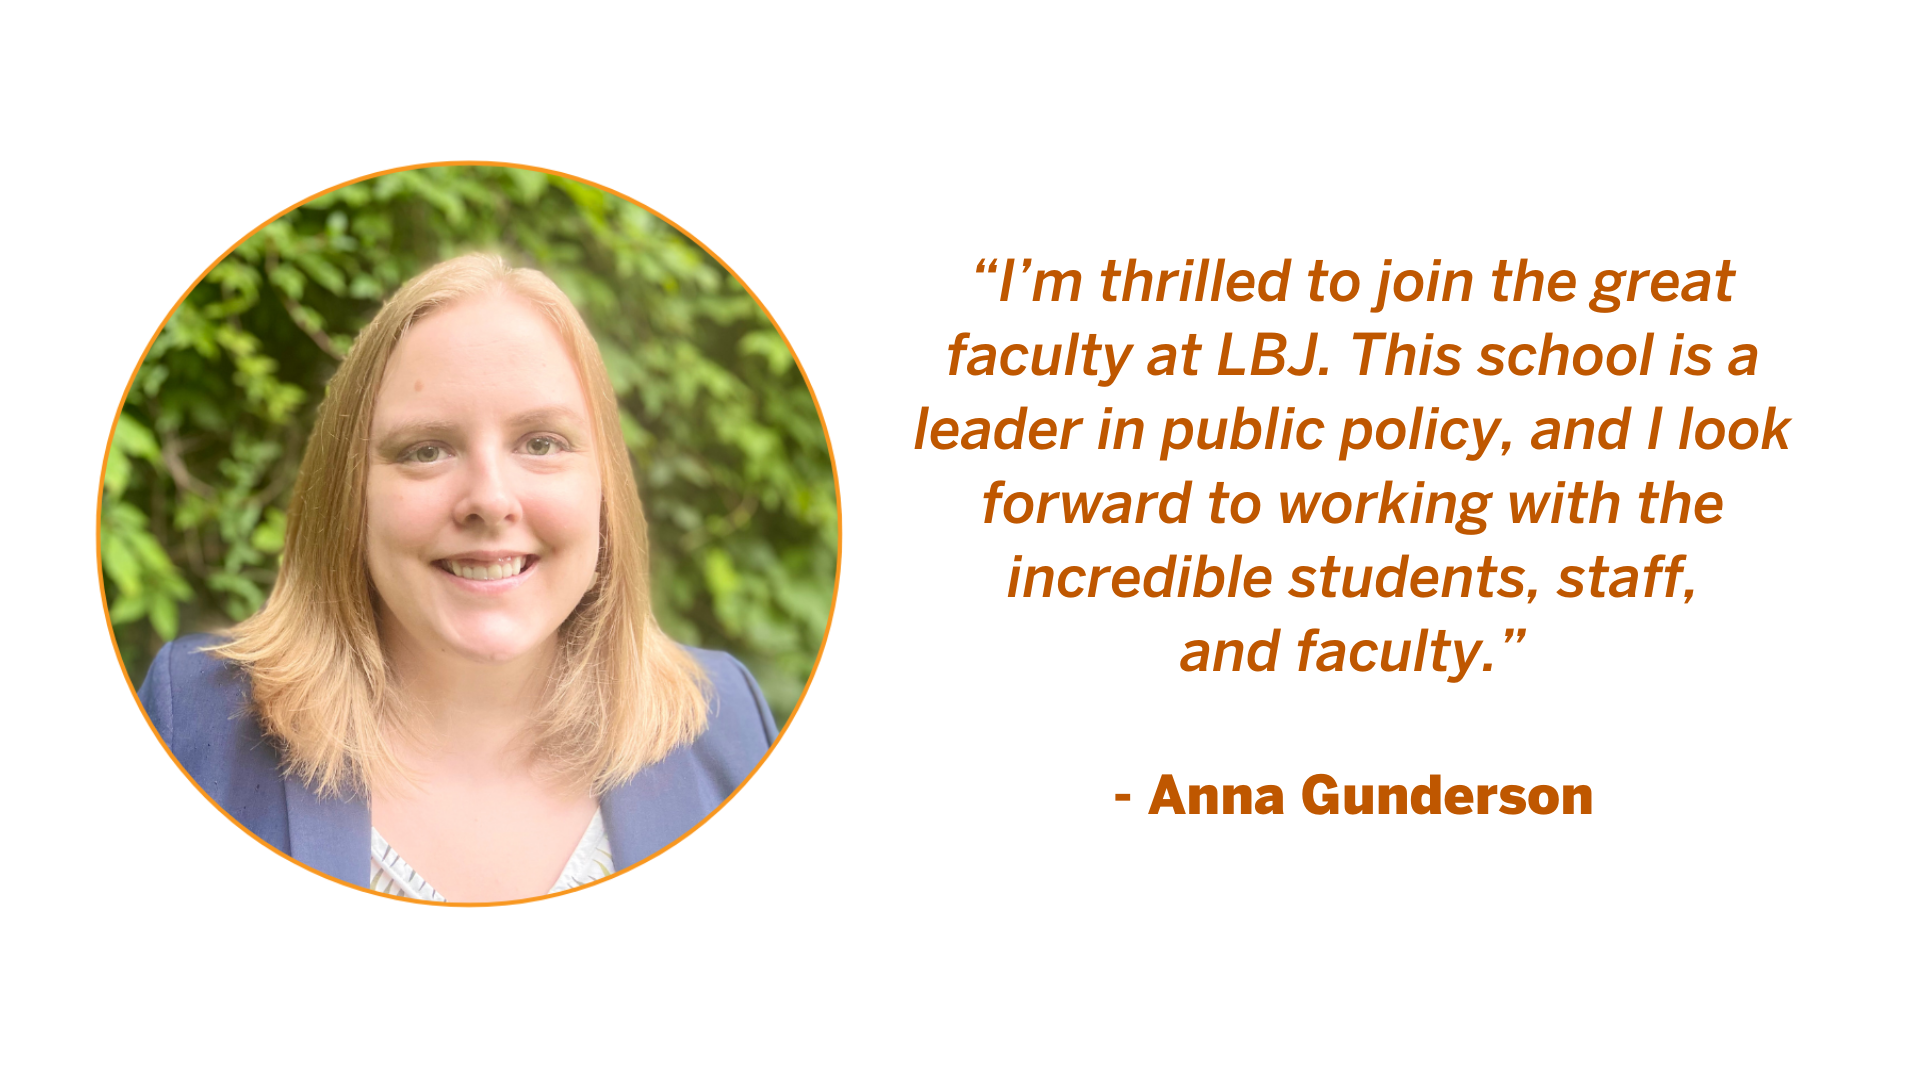 Anna Gunderson quote: “I’m thrilled to join the great faculty at LBJ. This school is a leader in public policy, and I look forward to working with the incredible students, staff, and faculty.”